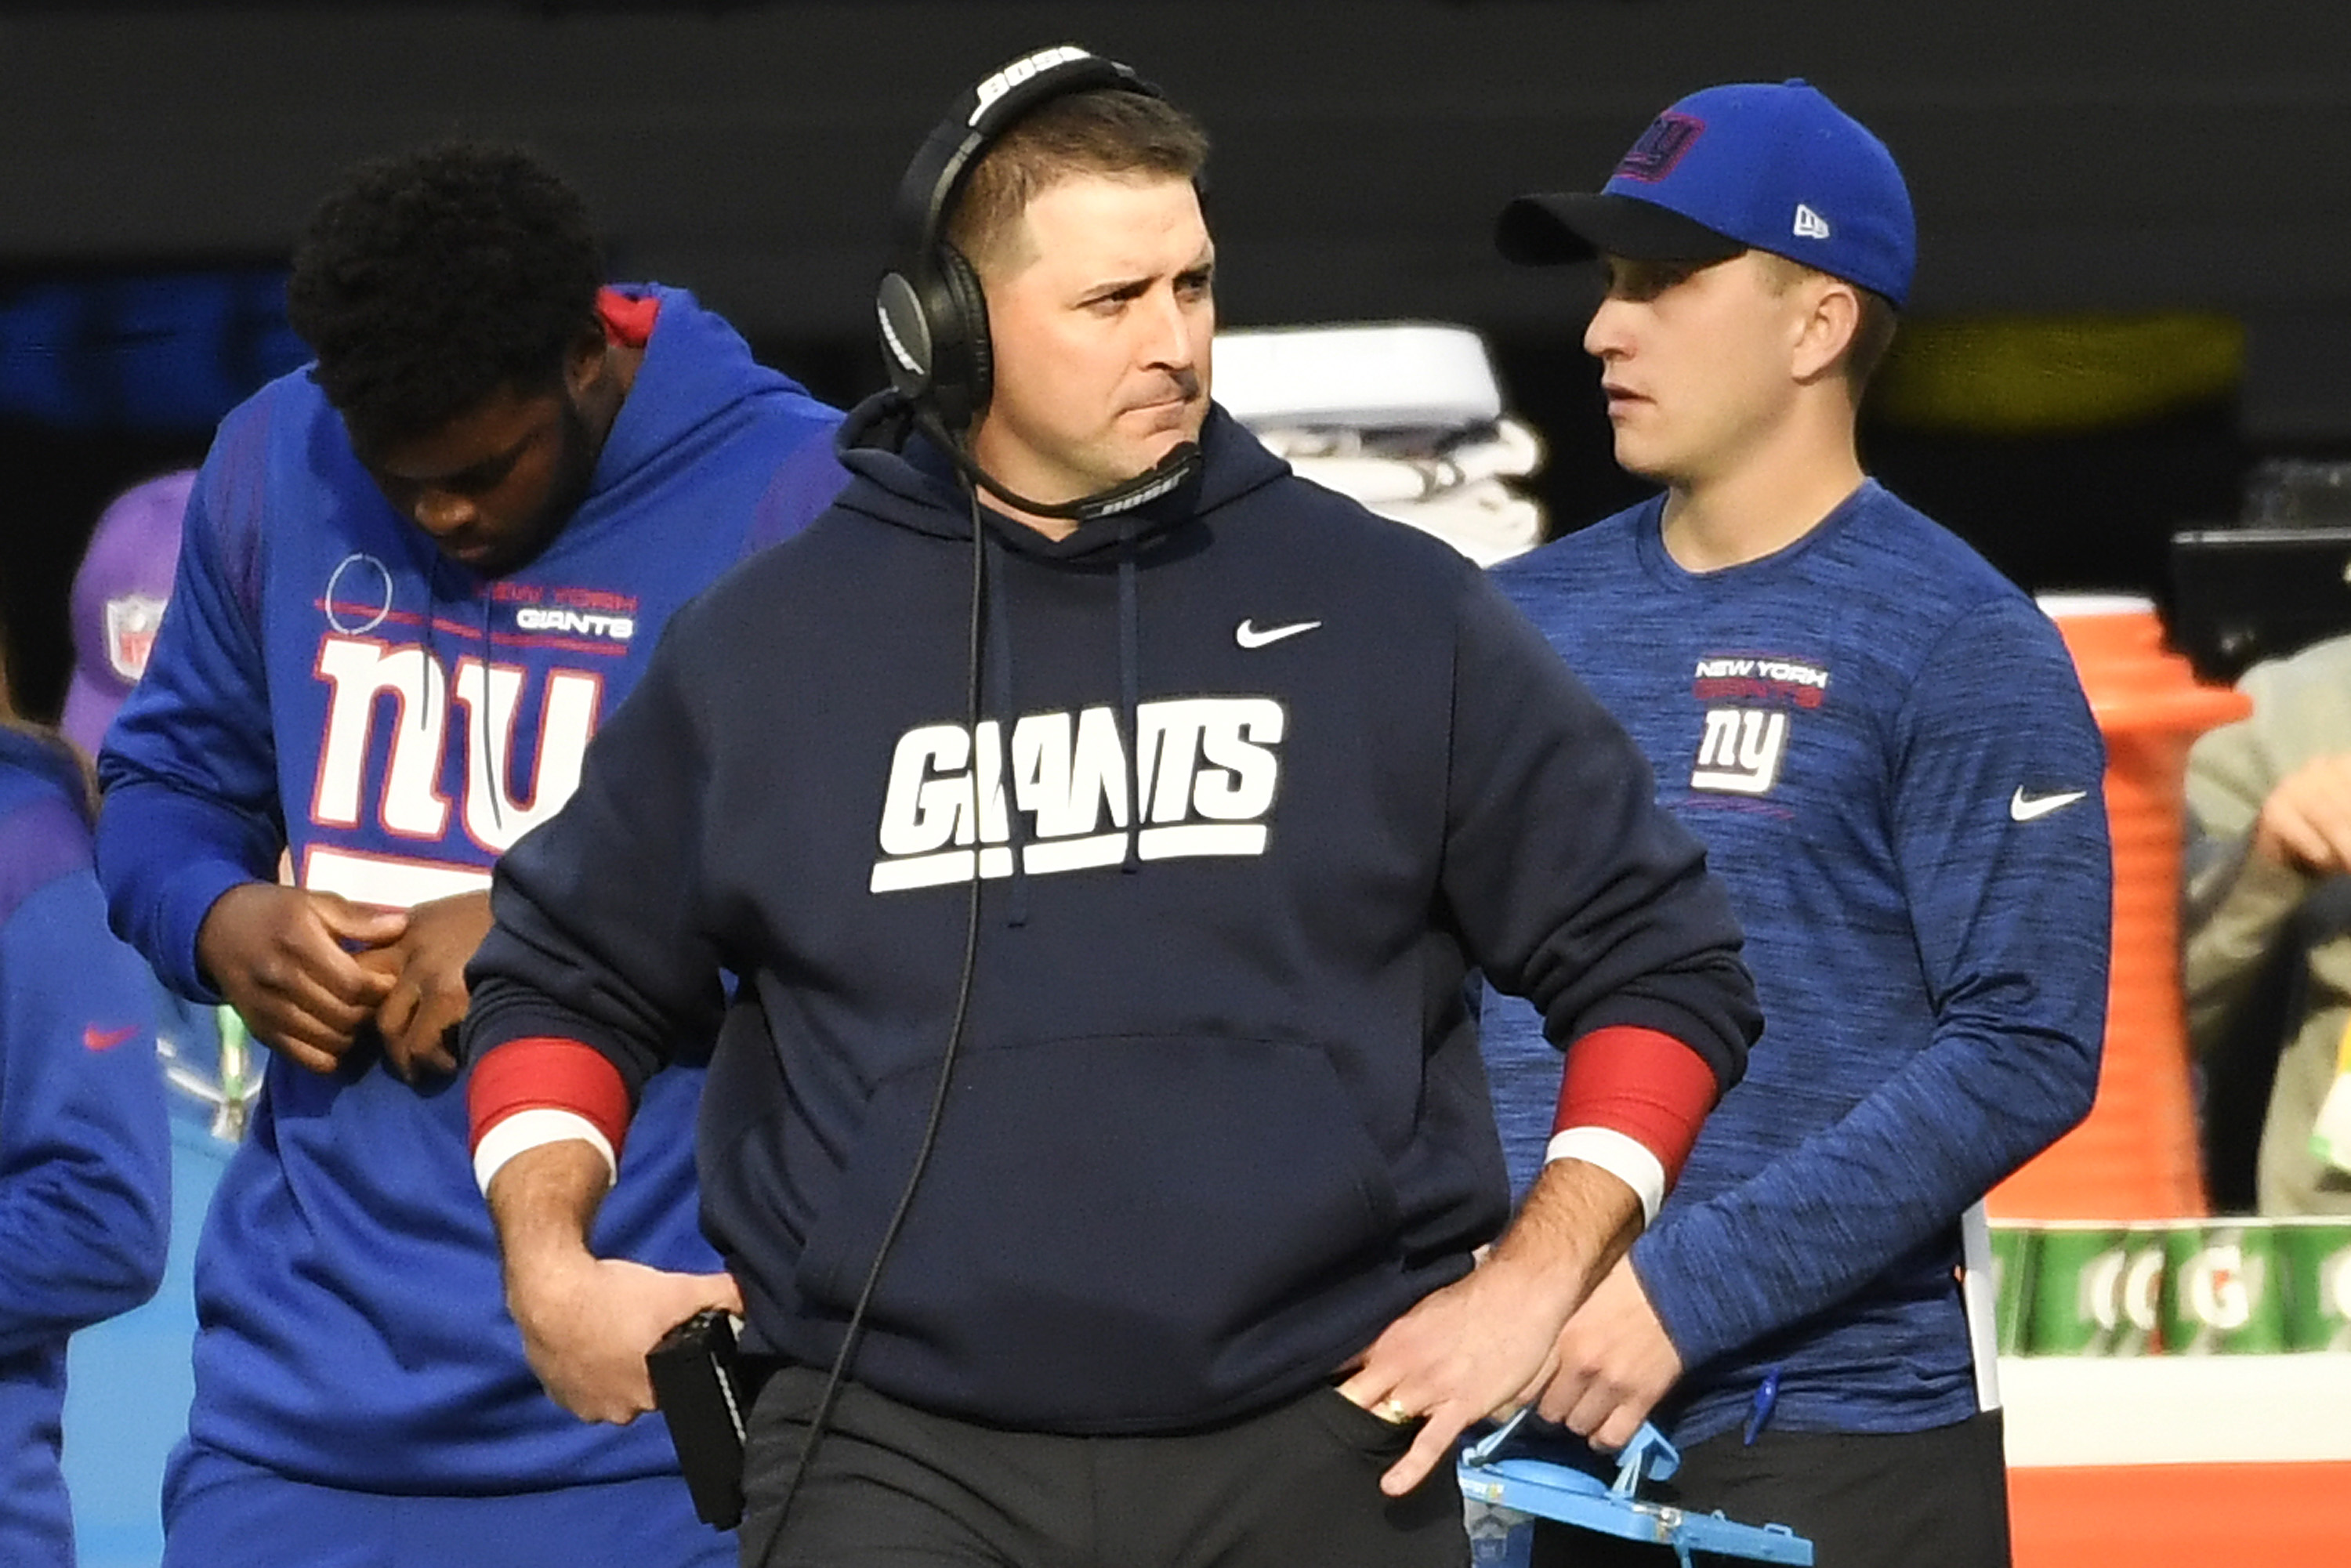 Giants head coach looks on from the sideline during game against the Chargers